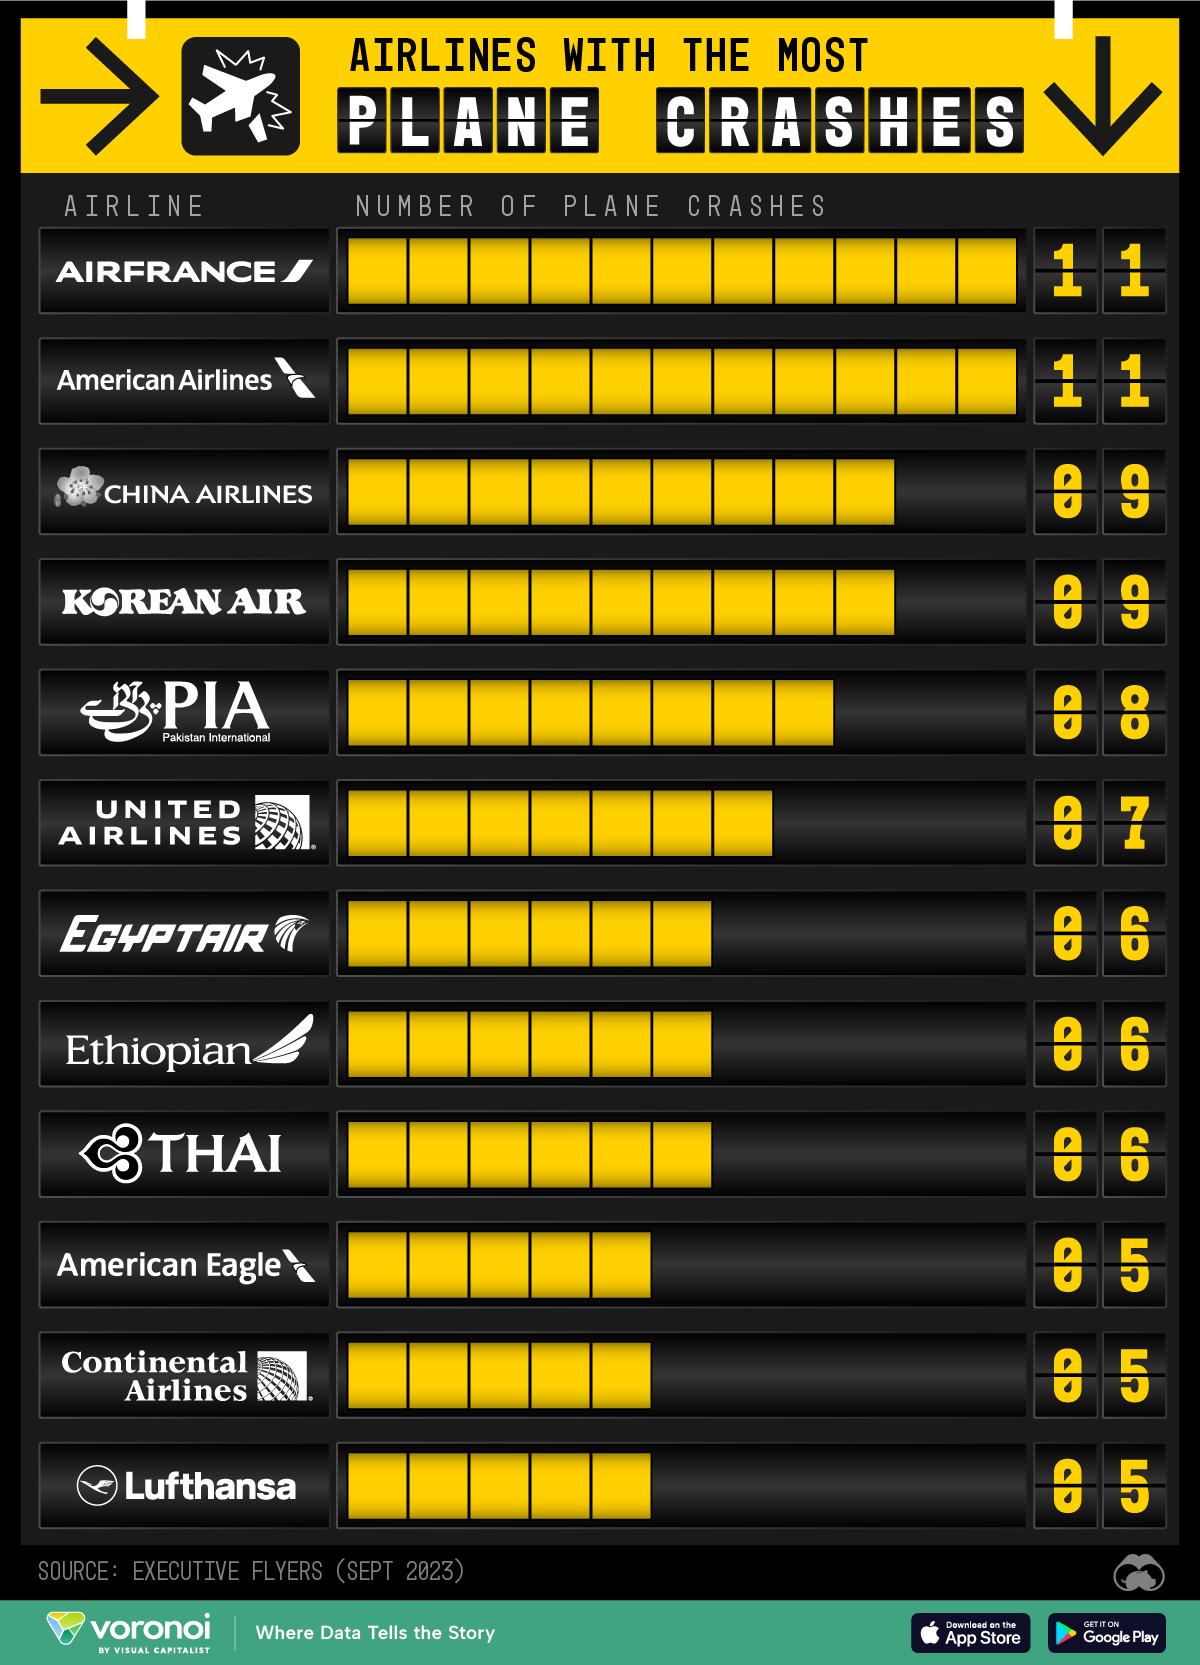 A bar chart showing the most plane crashes by airlines, current up to September 2023.